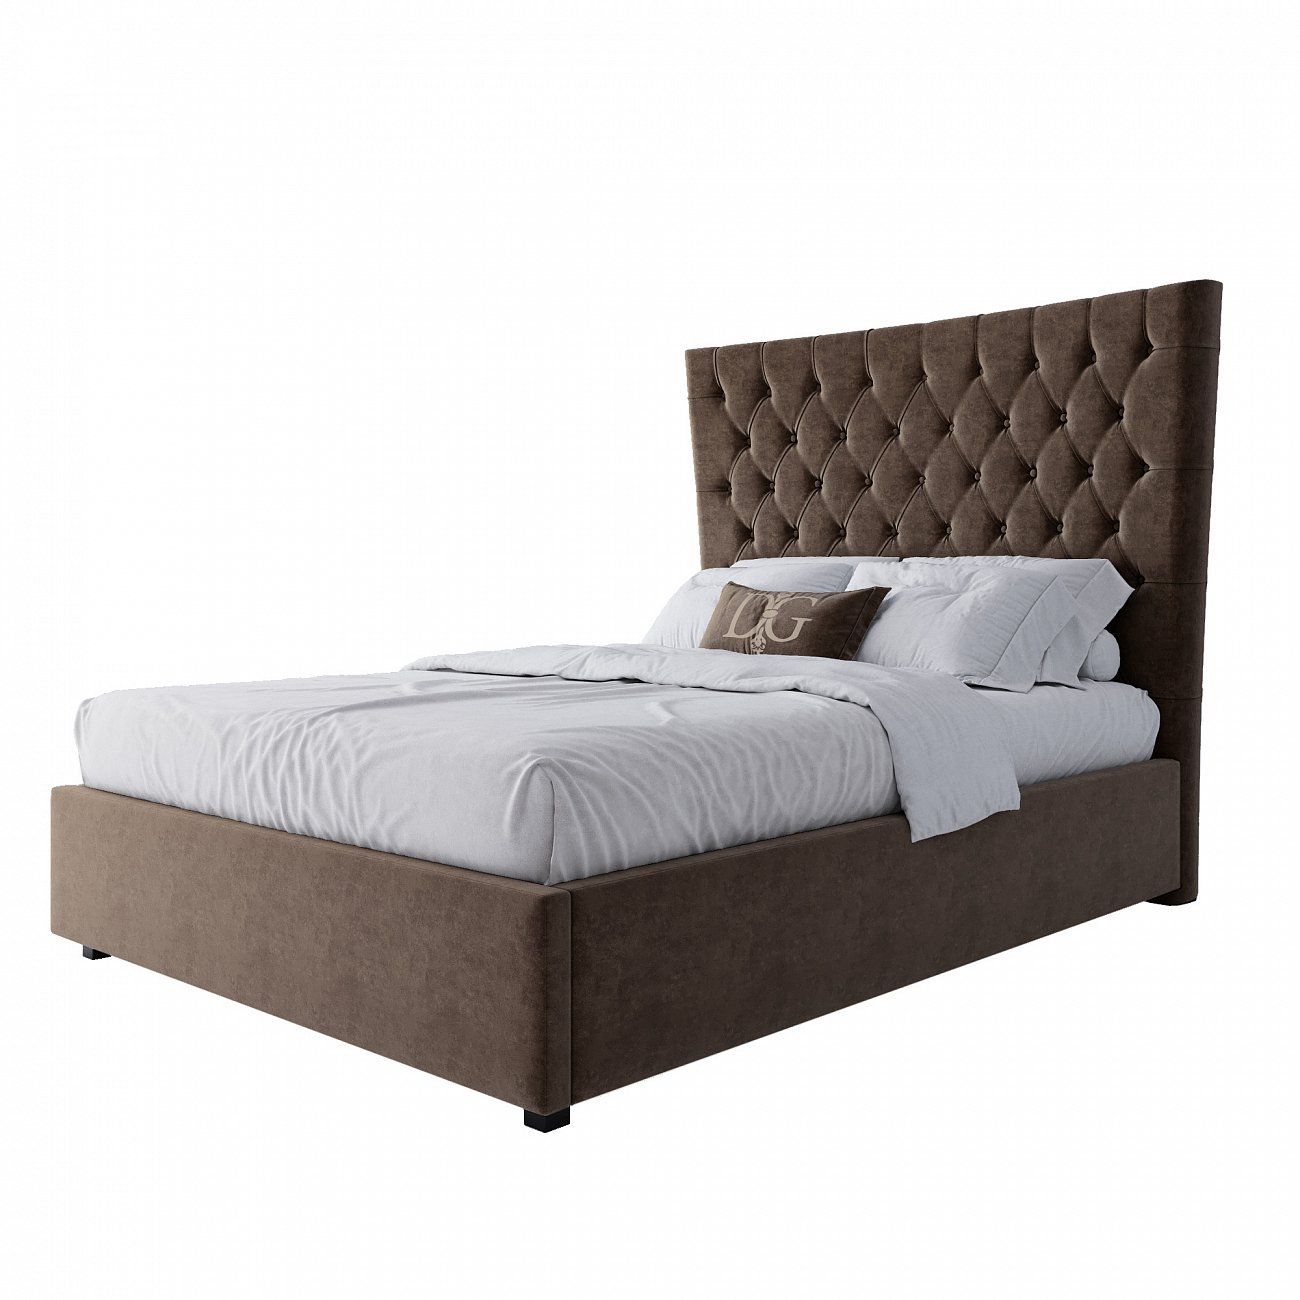 Teenage bed with carriage screed 140x200 brown QuickSand